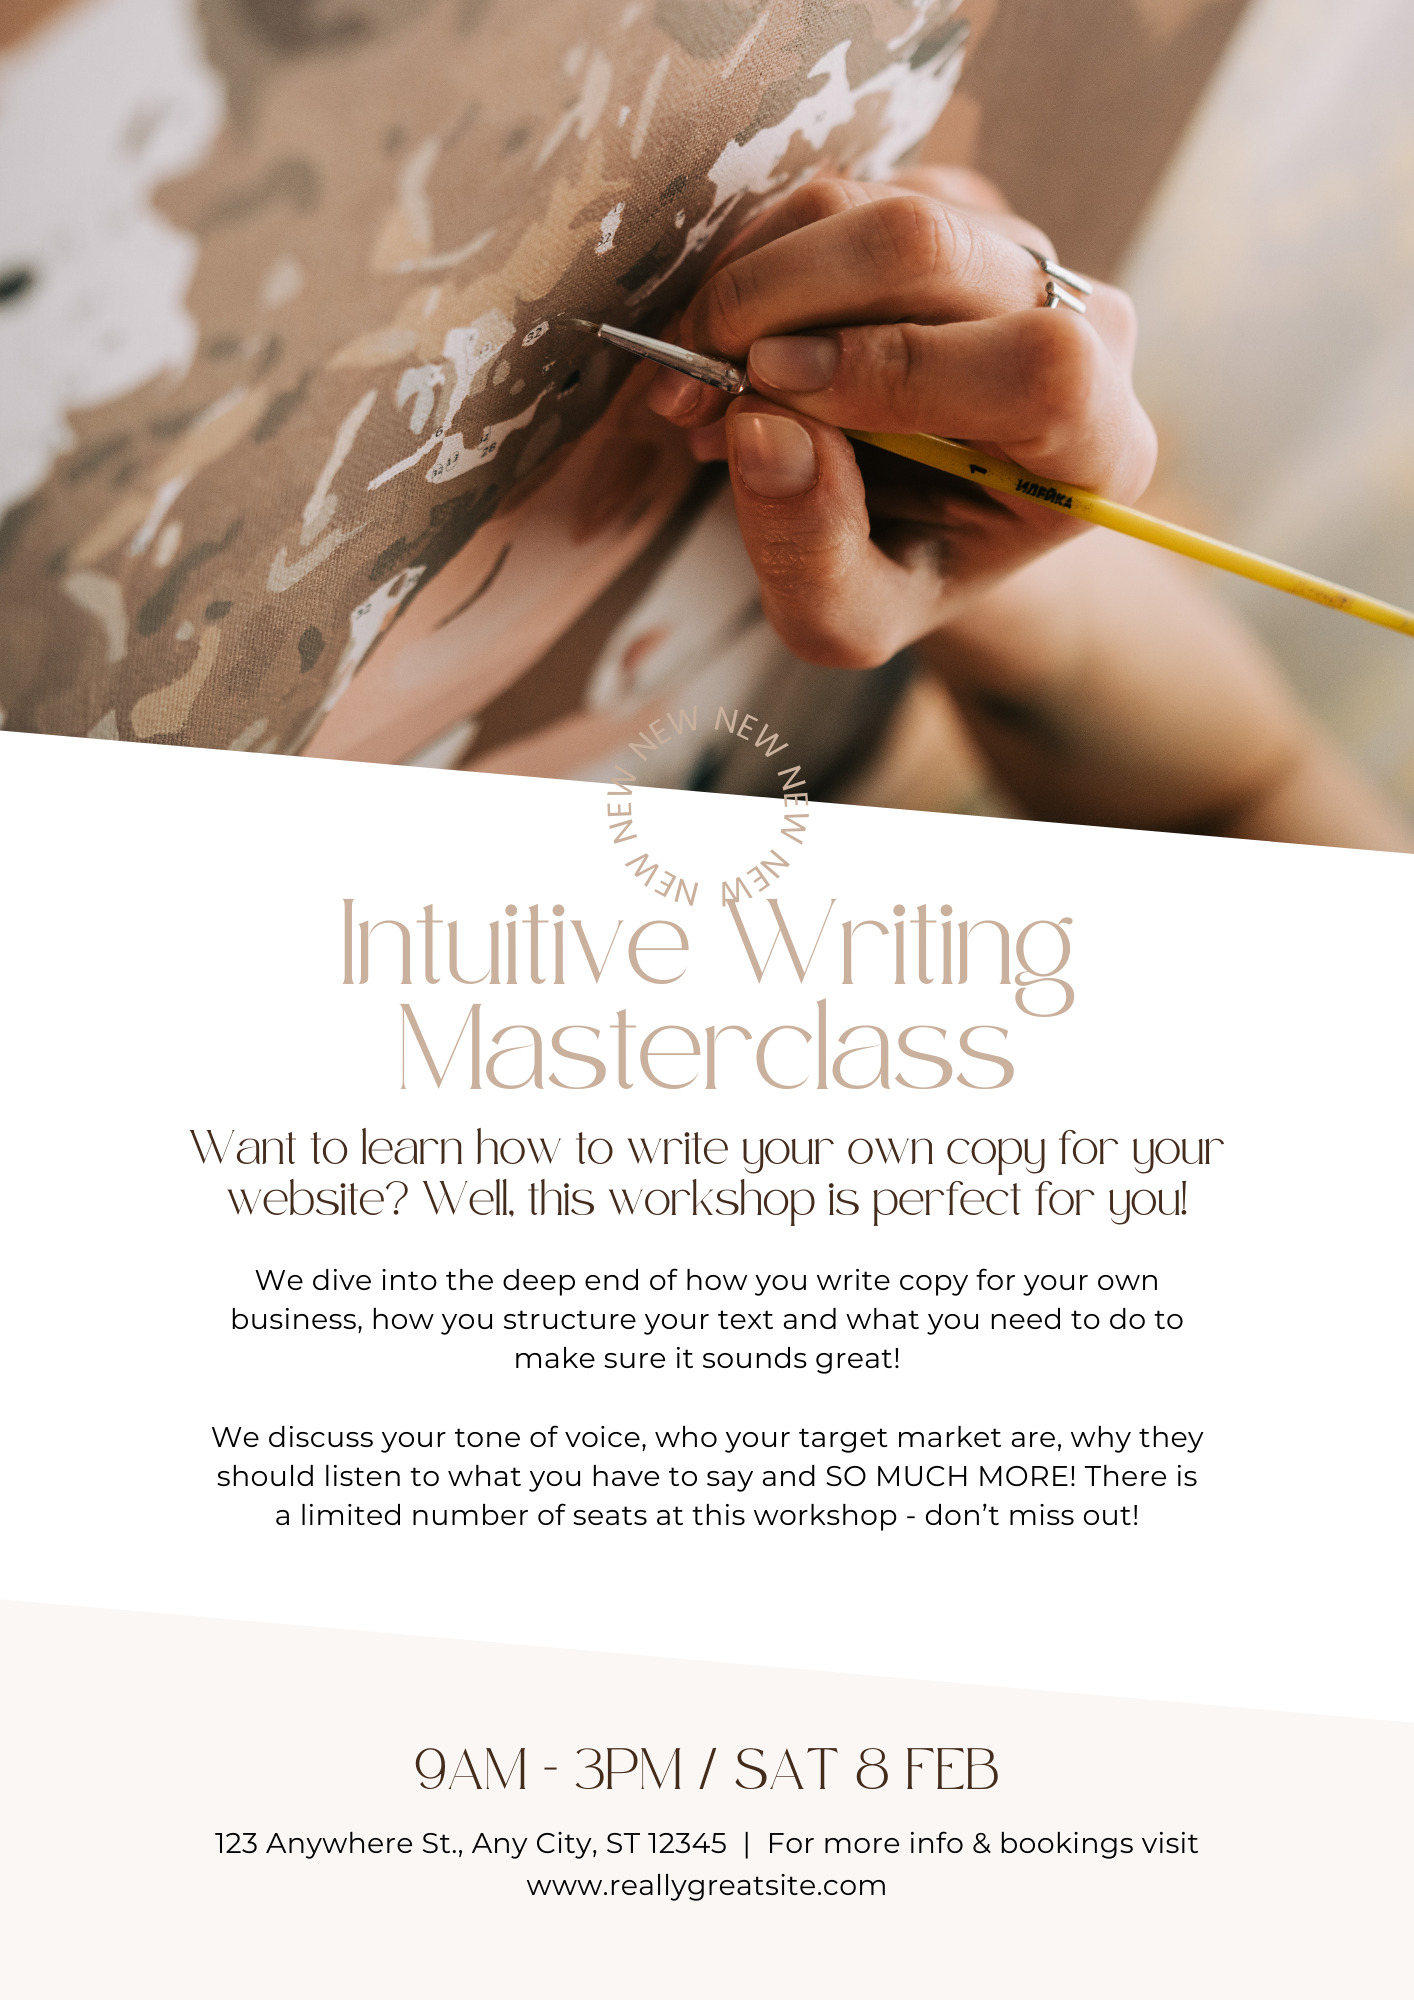 Intuitive Writing Masterclass for Beginners